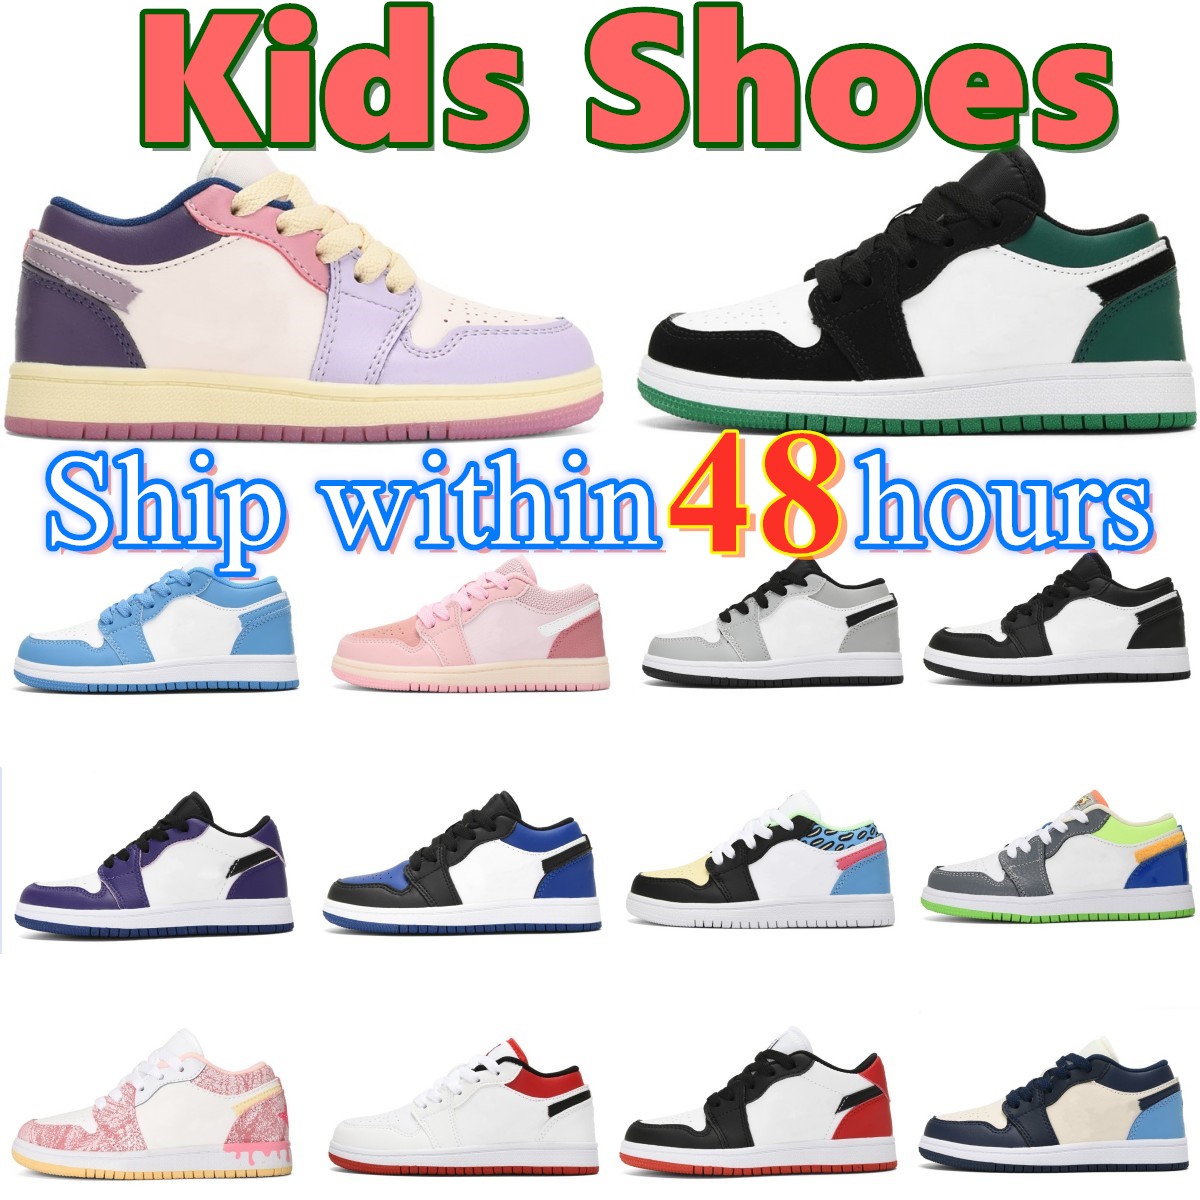 

Kids Sneakers toddlers Shoes Jumpman 1s 1 boys girls youth kid designer Shoe Children baby Chicago UNC Court Purple Royal Toe Basketball trainers